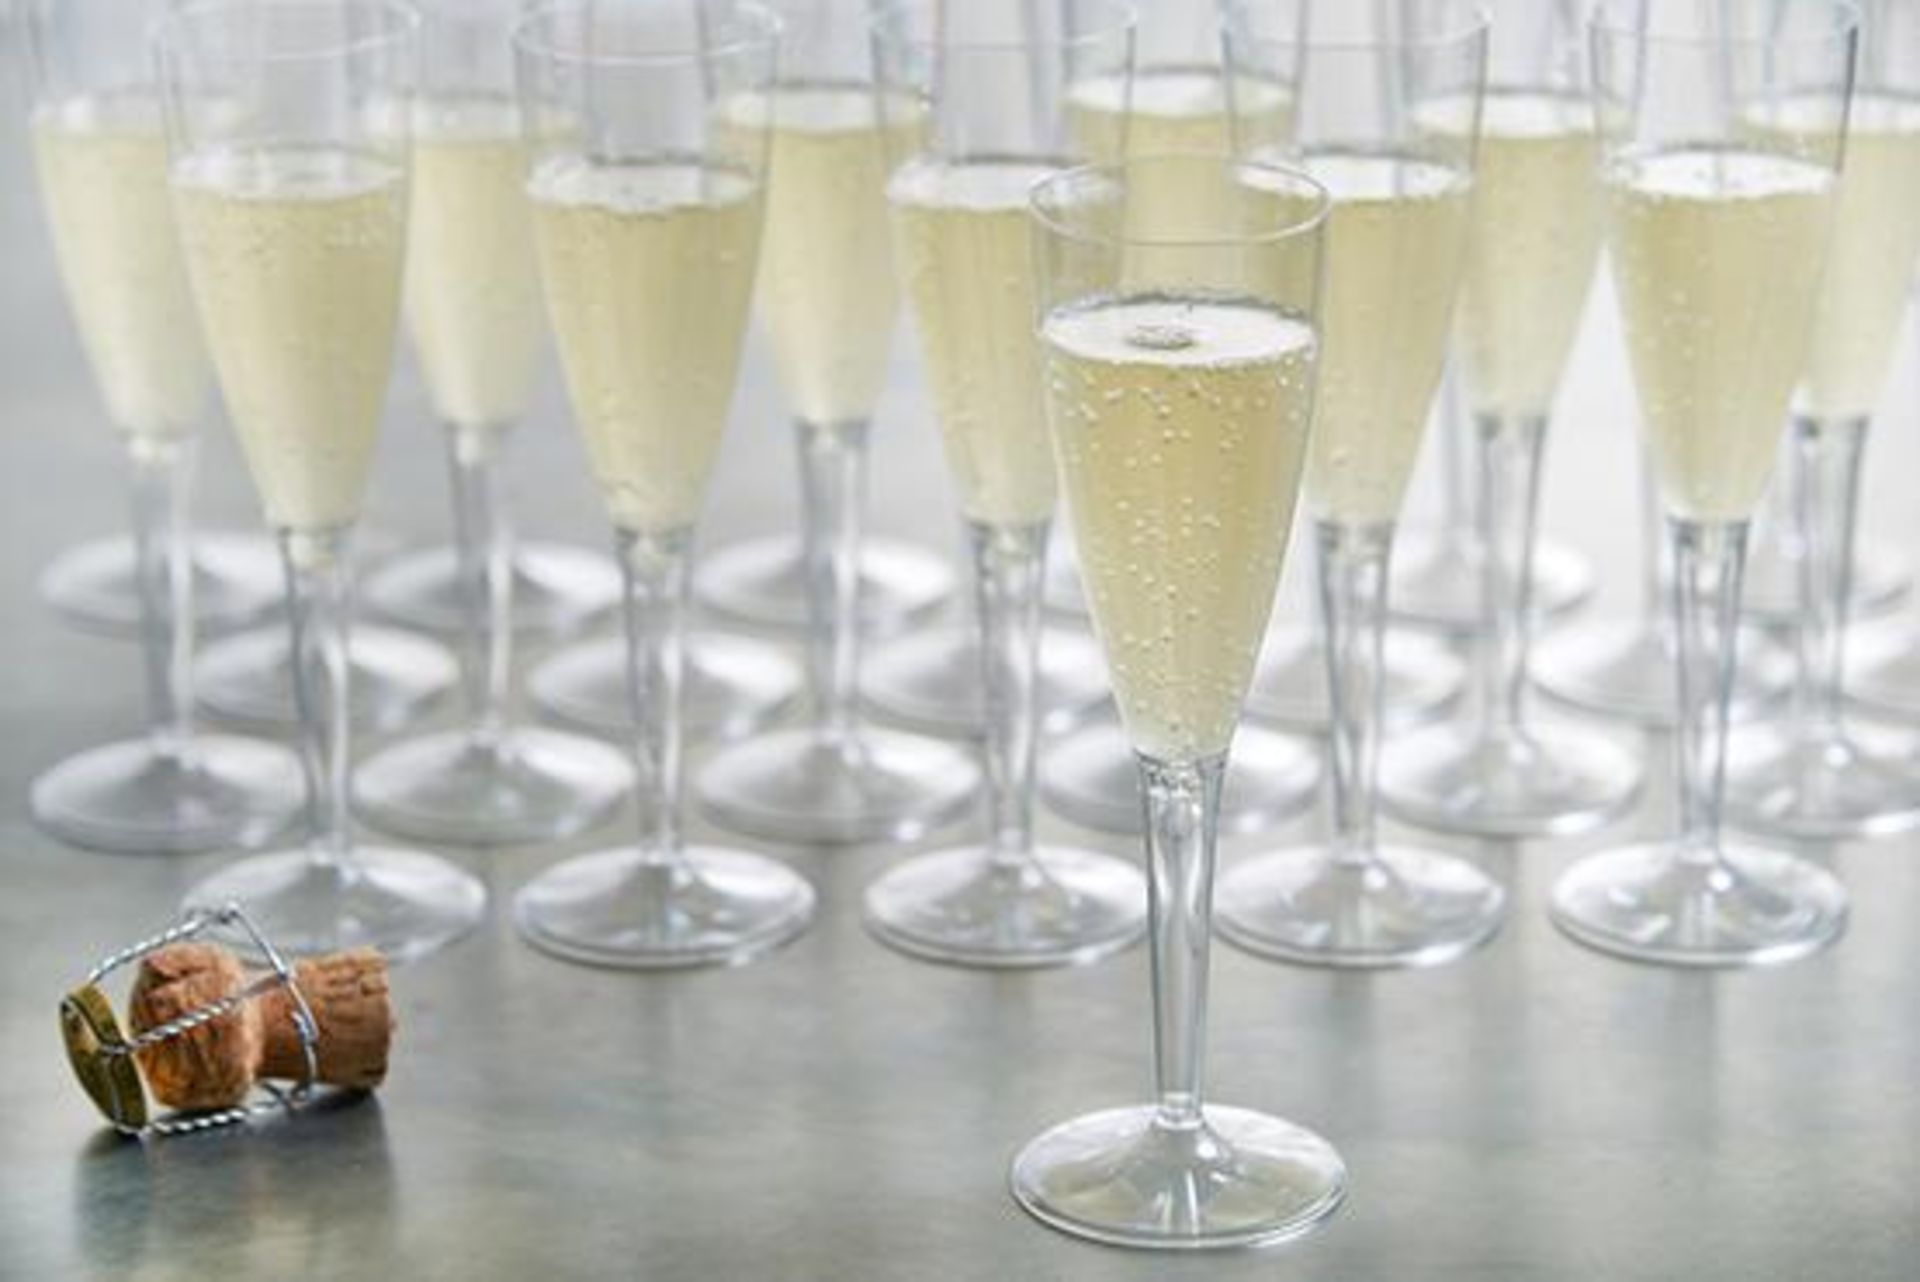 500 x Disposable Clear Plastic Champagne Flutes (170ml) - Brand: Remmerco CG111P - Brand New Sealed